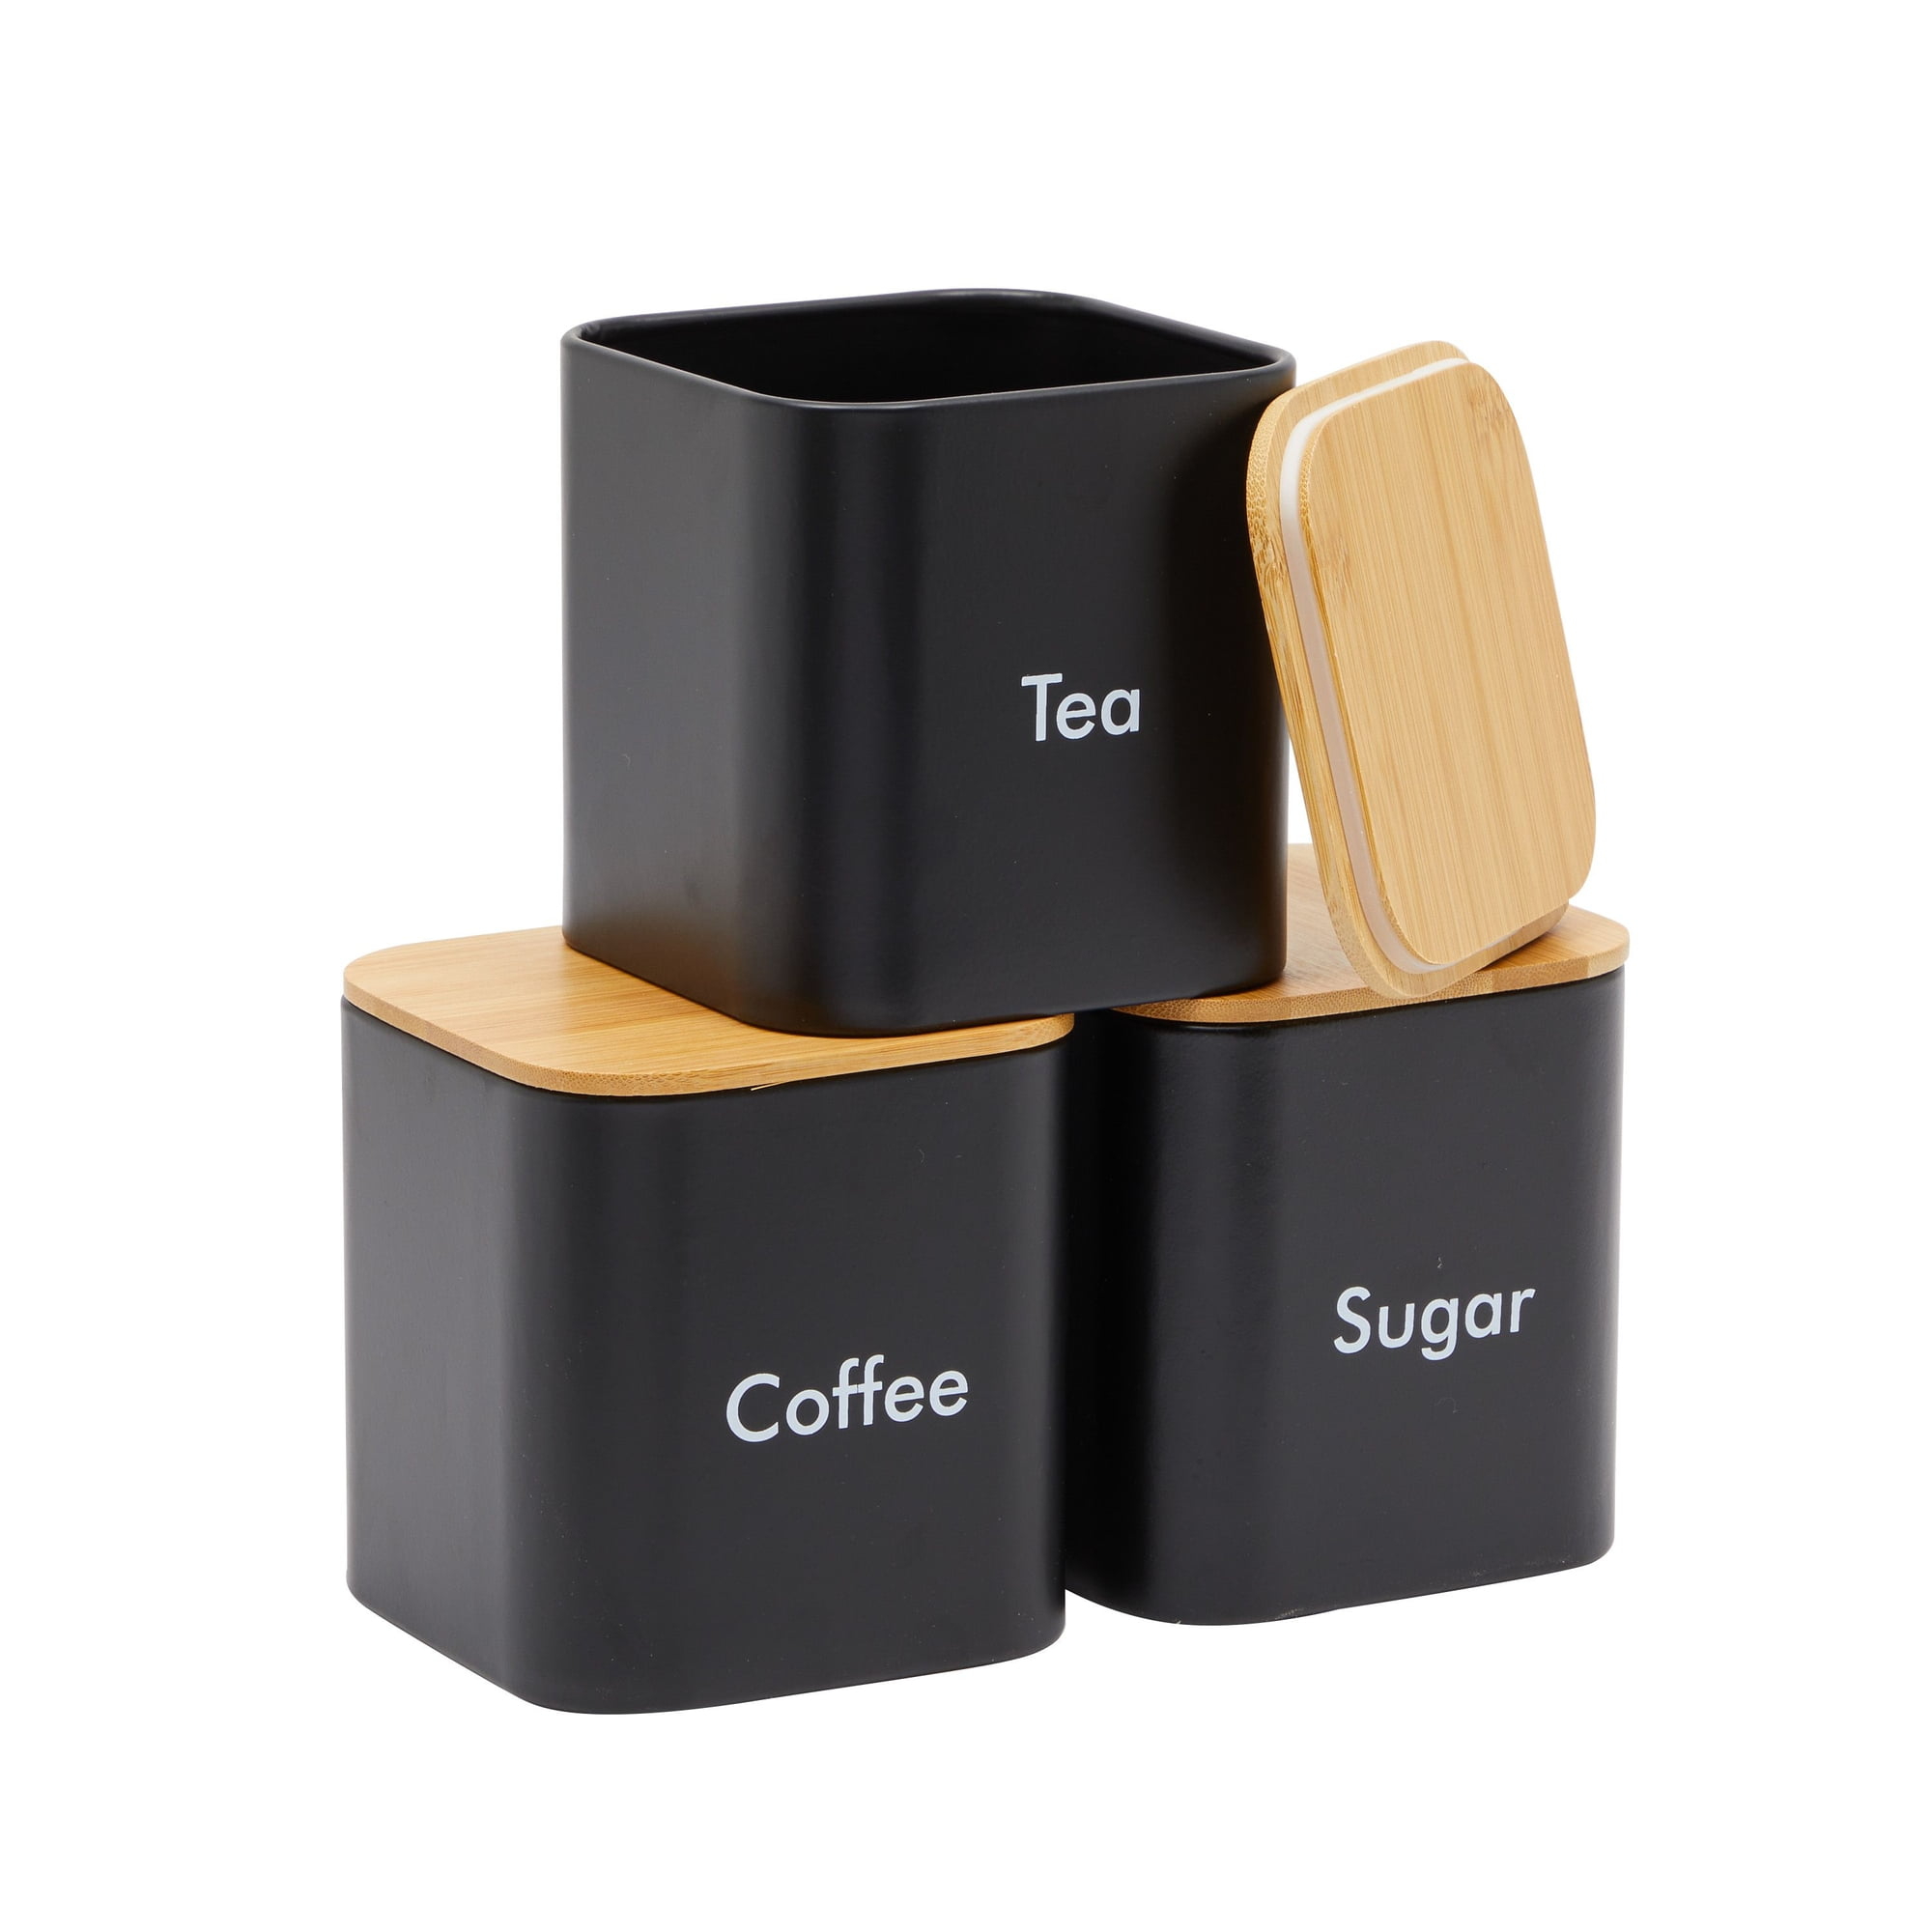 Sugar set. Of 7 Canisters h Condiment Set with ons Holder with Base Spice Salt flour Coffee Tea Sugar jc7040. Sugar 3 pieces.